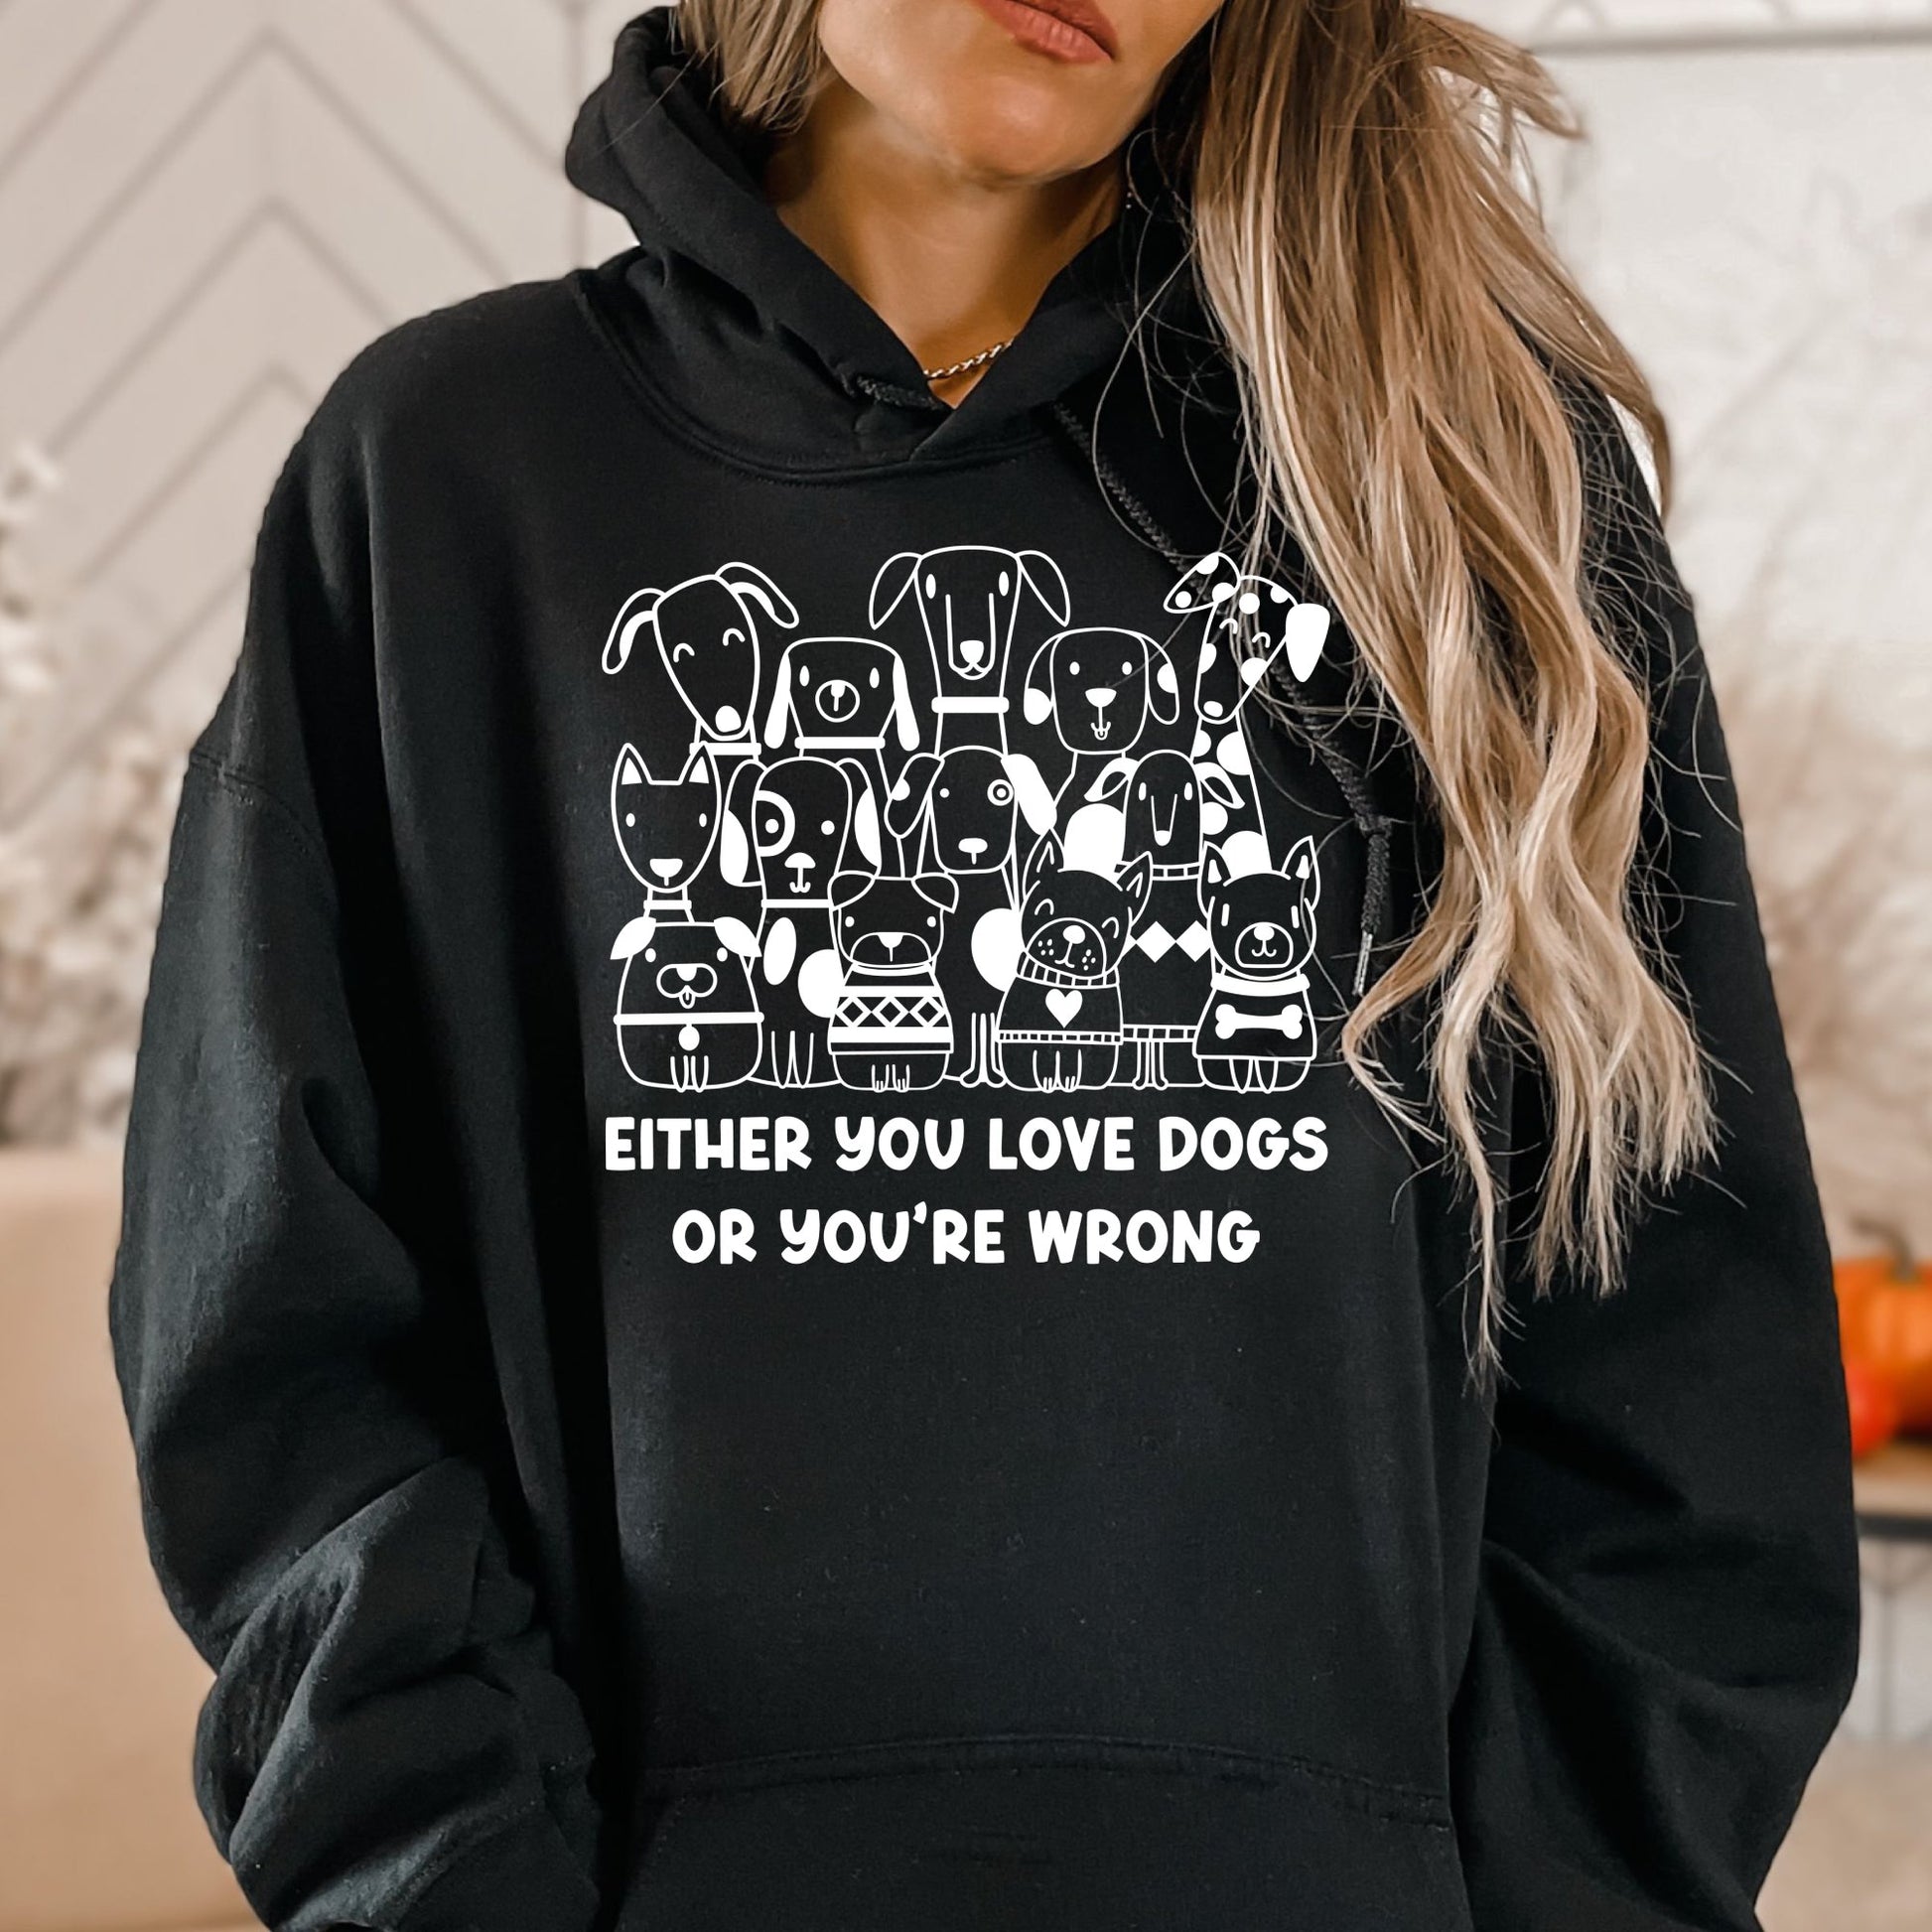 Either You Love Dogs or You're Wrong Hoodie Sweatshirt - PuppyJo Hoodie S / Black